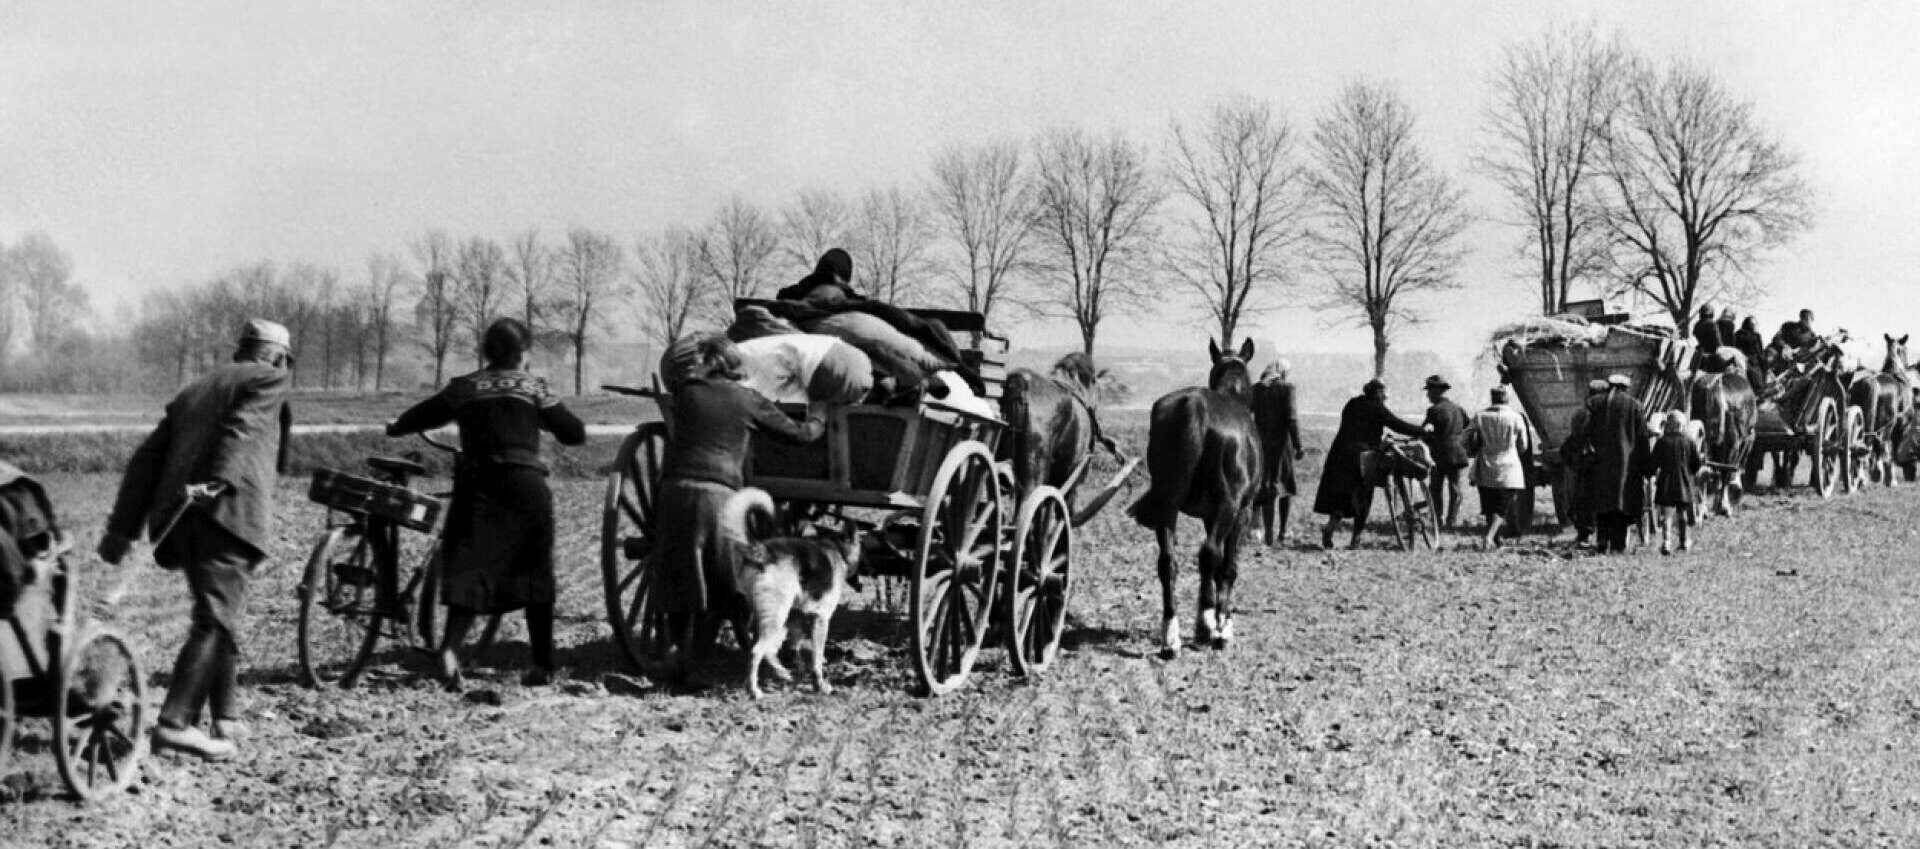 With their possessions piled into horse-drawn wagons, German civilians flee in an orderly line to a place of hoped-for safety.